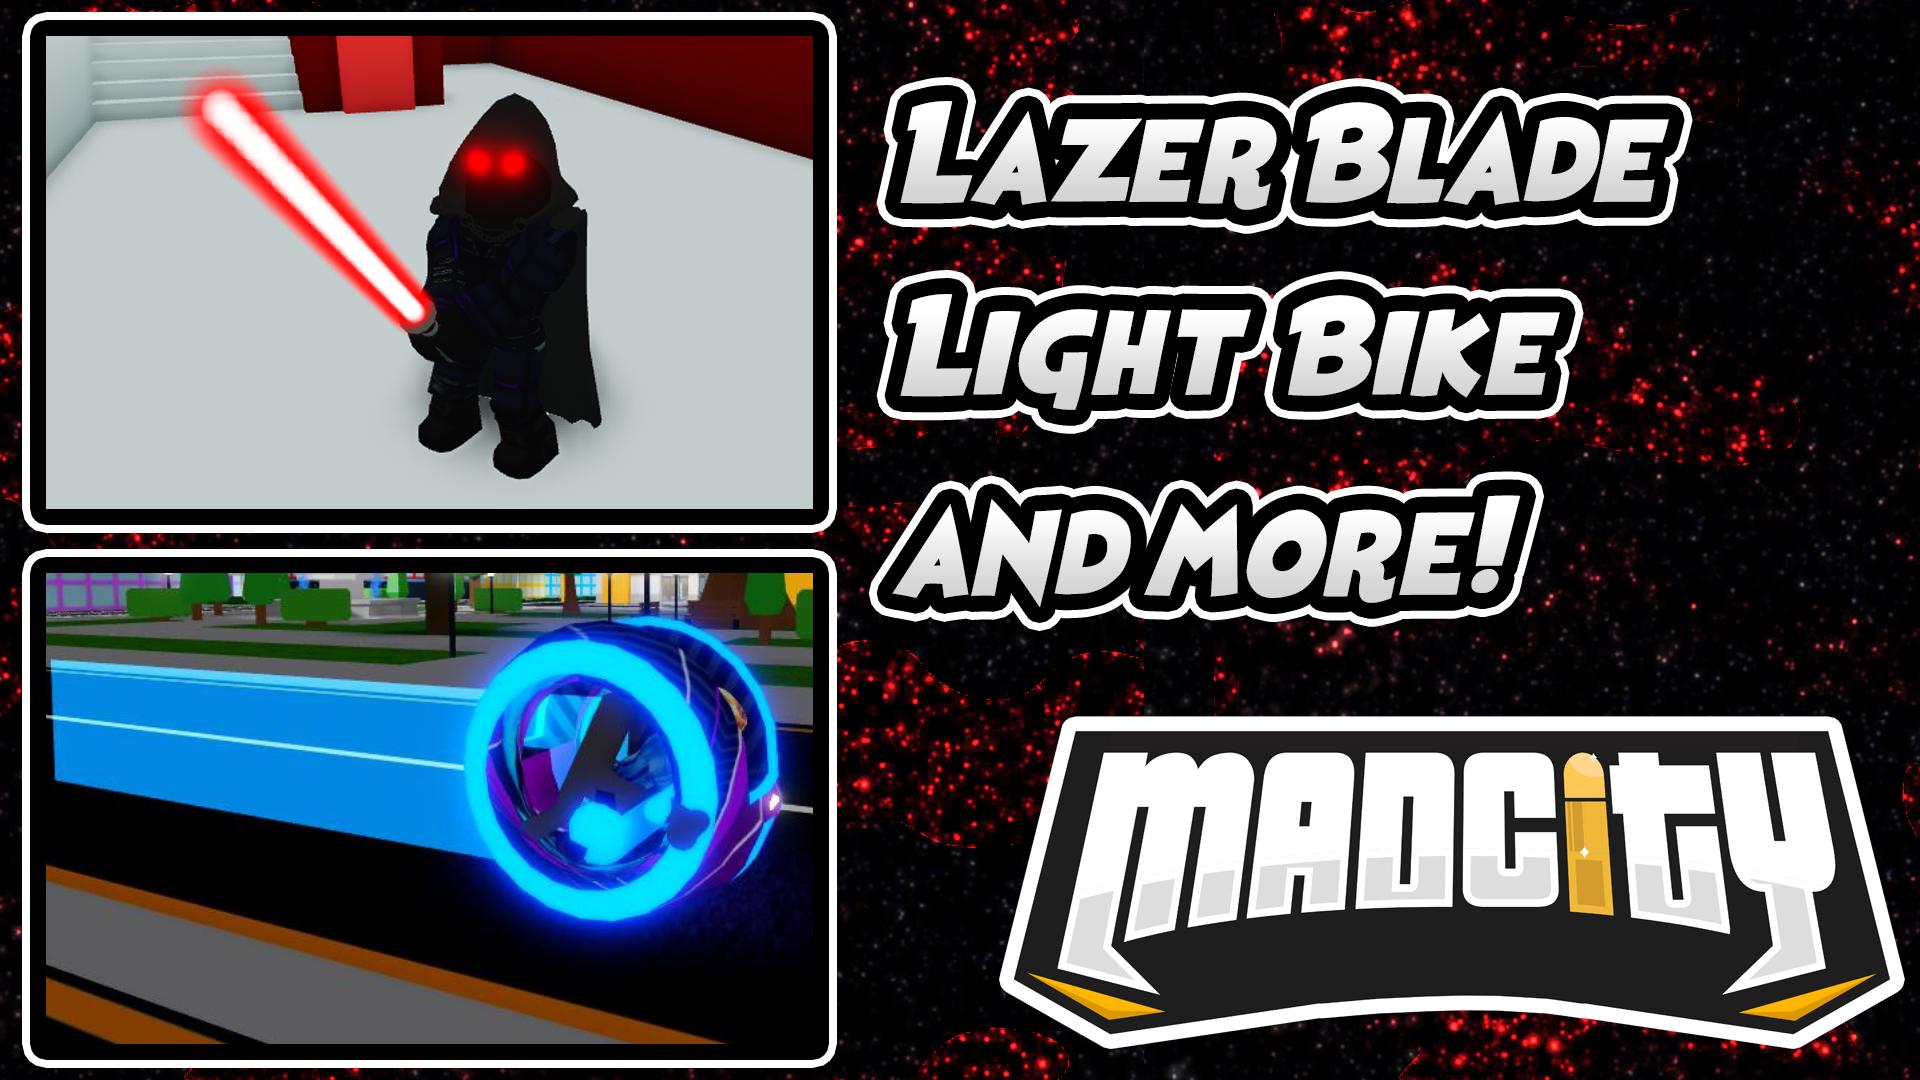 Taylor Sterling On Twitter Lazerblade The Ultimate Melee Weapon Deflect Bullets Secret Easter Egg Light Bike Too Fast 4 New Vip Server Owner Commands Gameplay Tweaks Https T Co Oik2rmqka3 - roblox mad city chest key